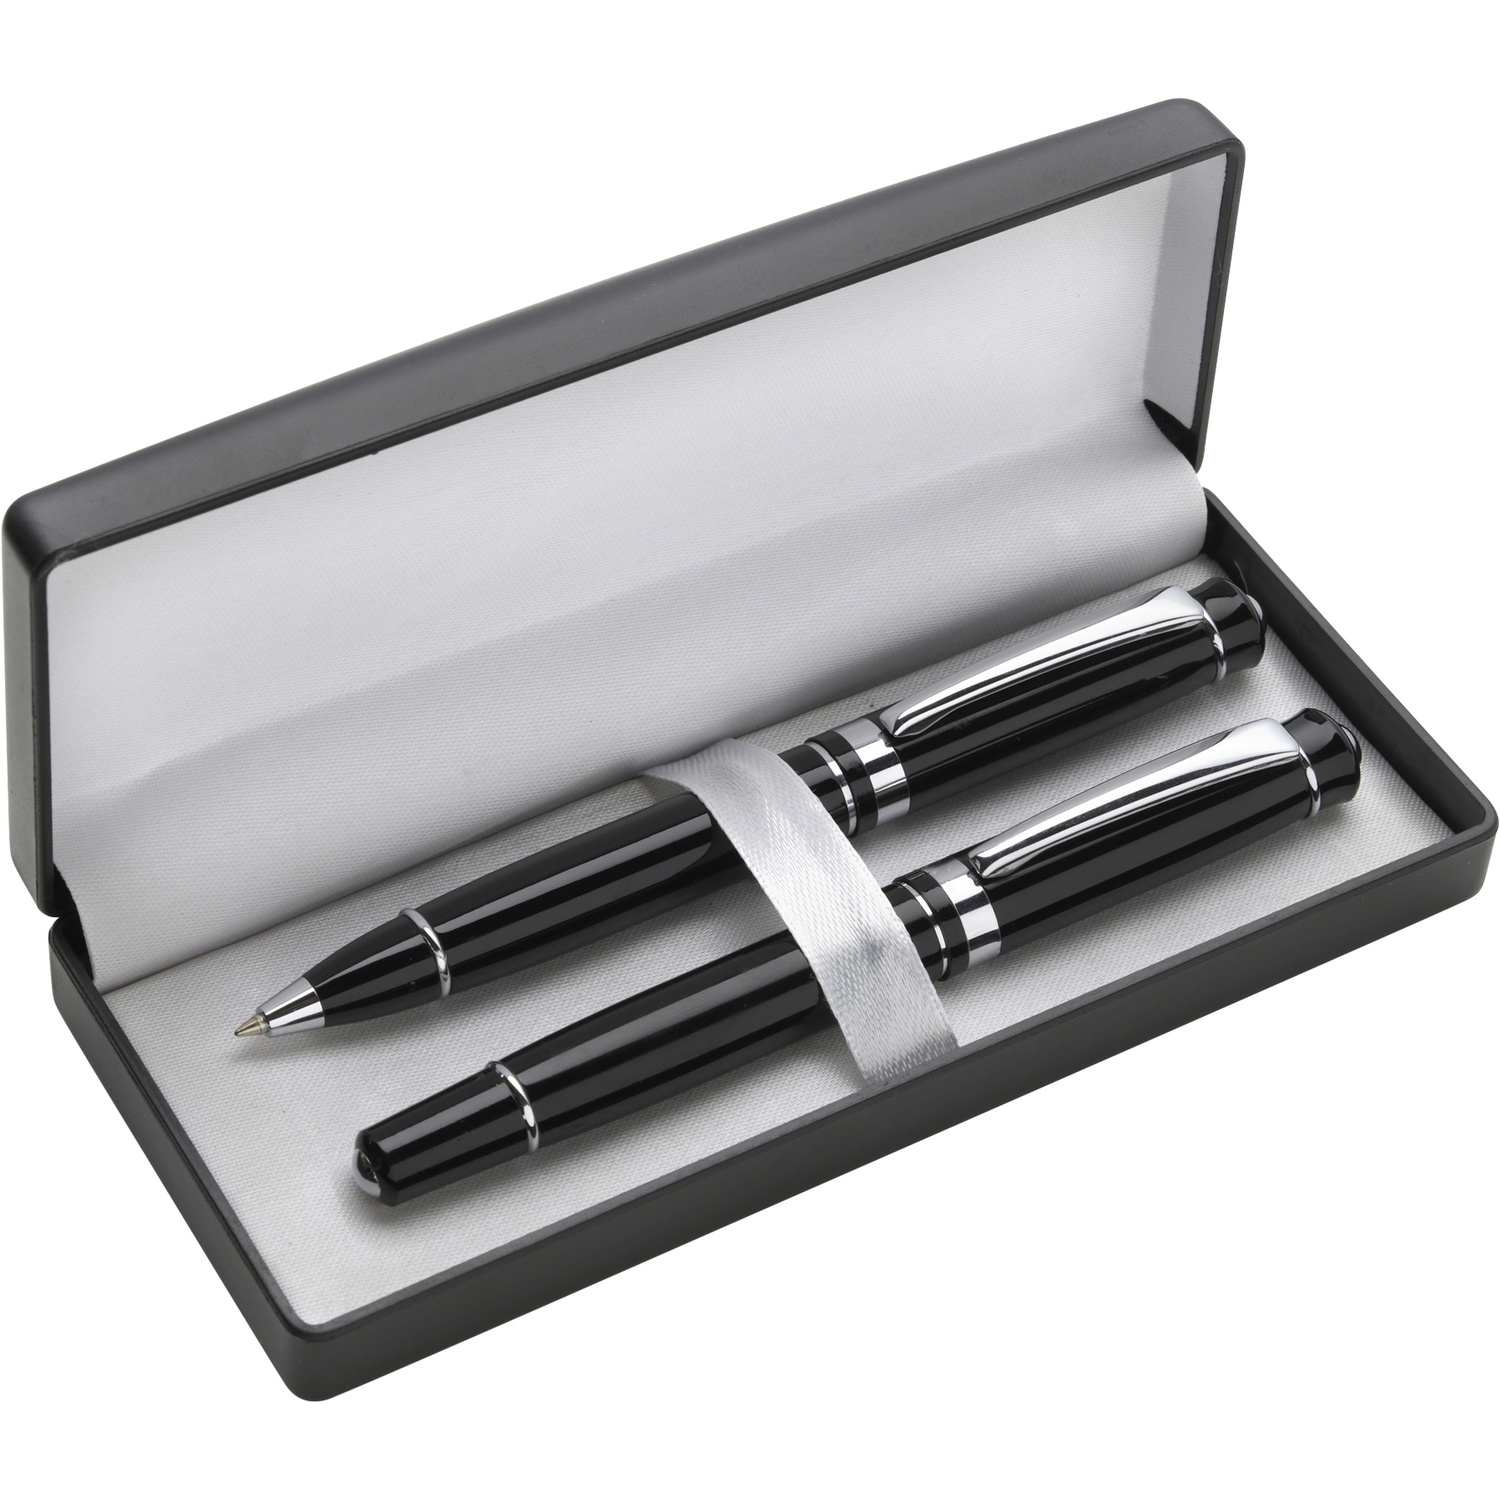 009966 001999999 3d135 gbo pro01 fal - Ballpen and rollerball